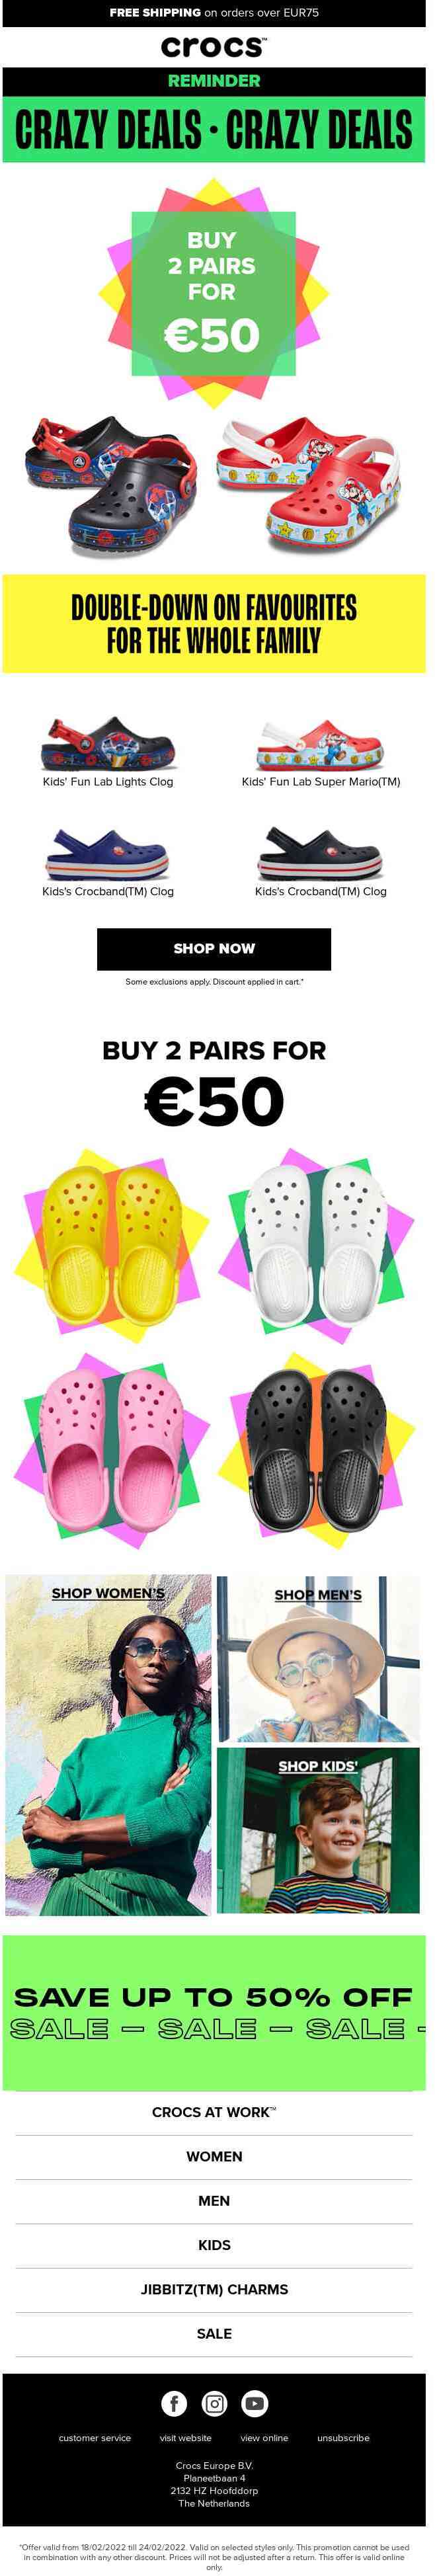 Reminder: 2 for €50 on select styles